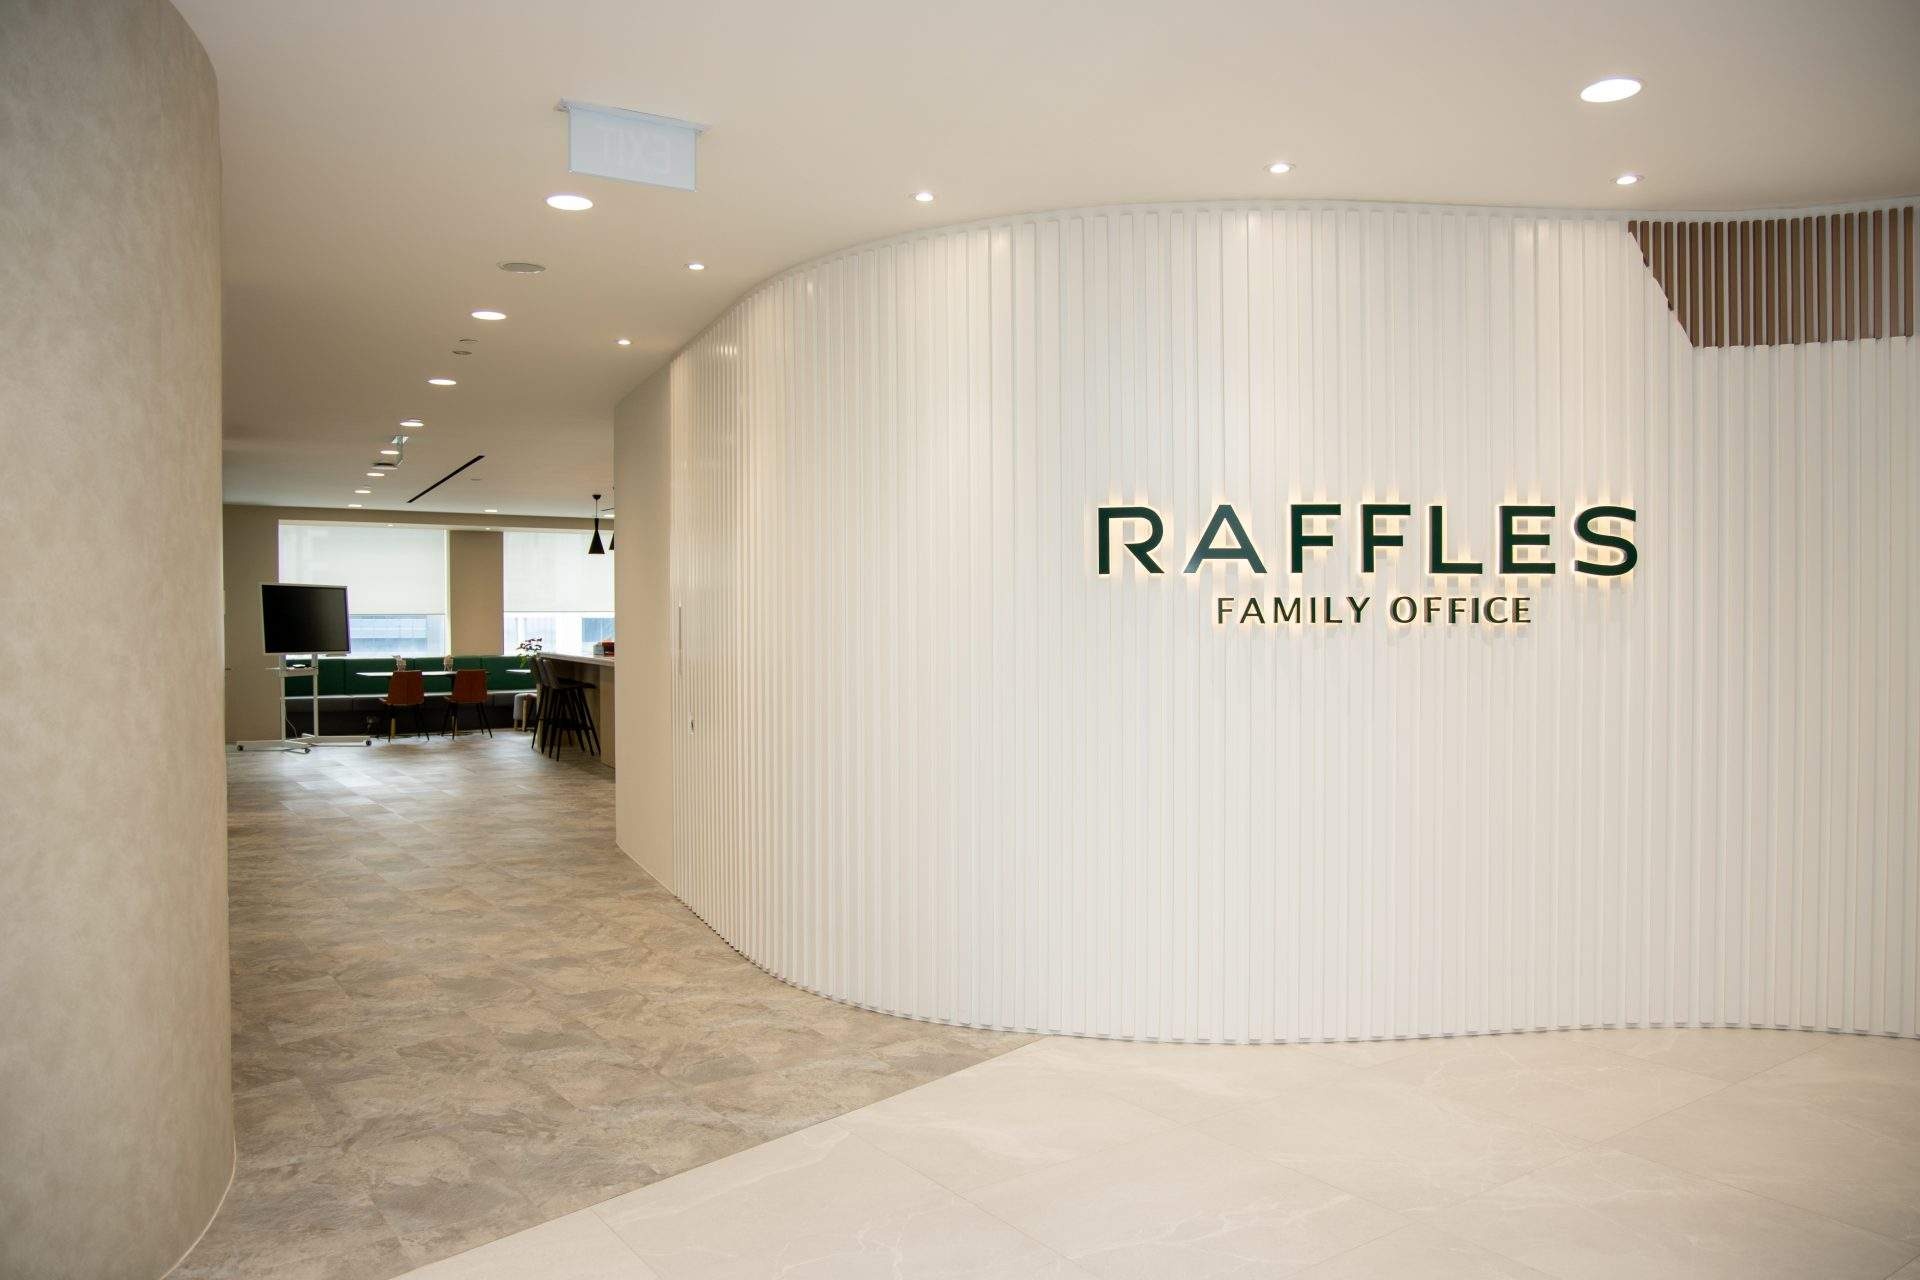 Raffles Family Office bolsters private equity focus in Southeast Asia